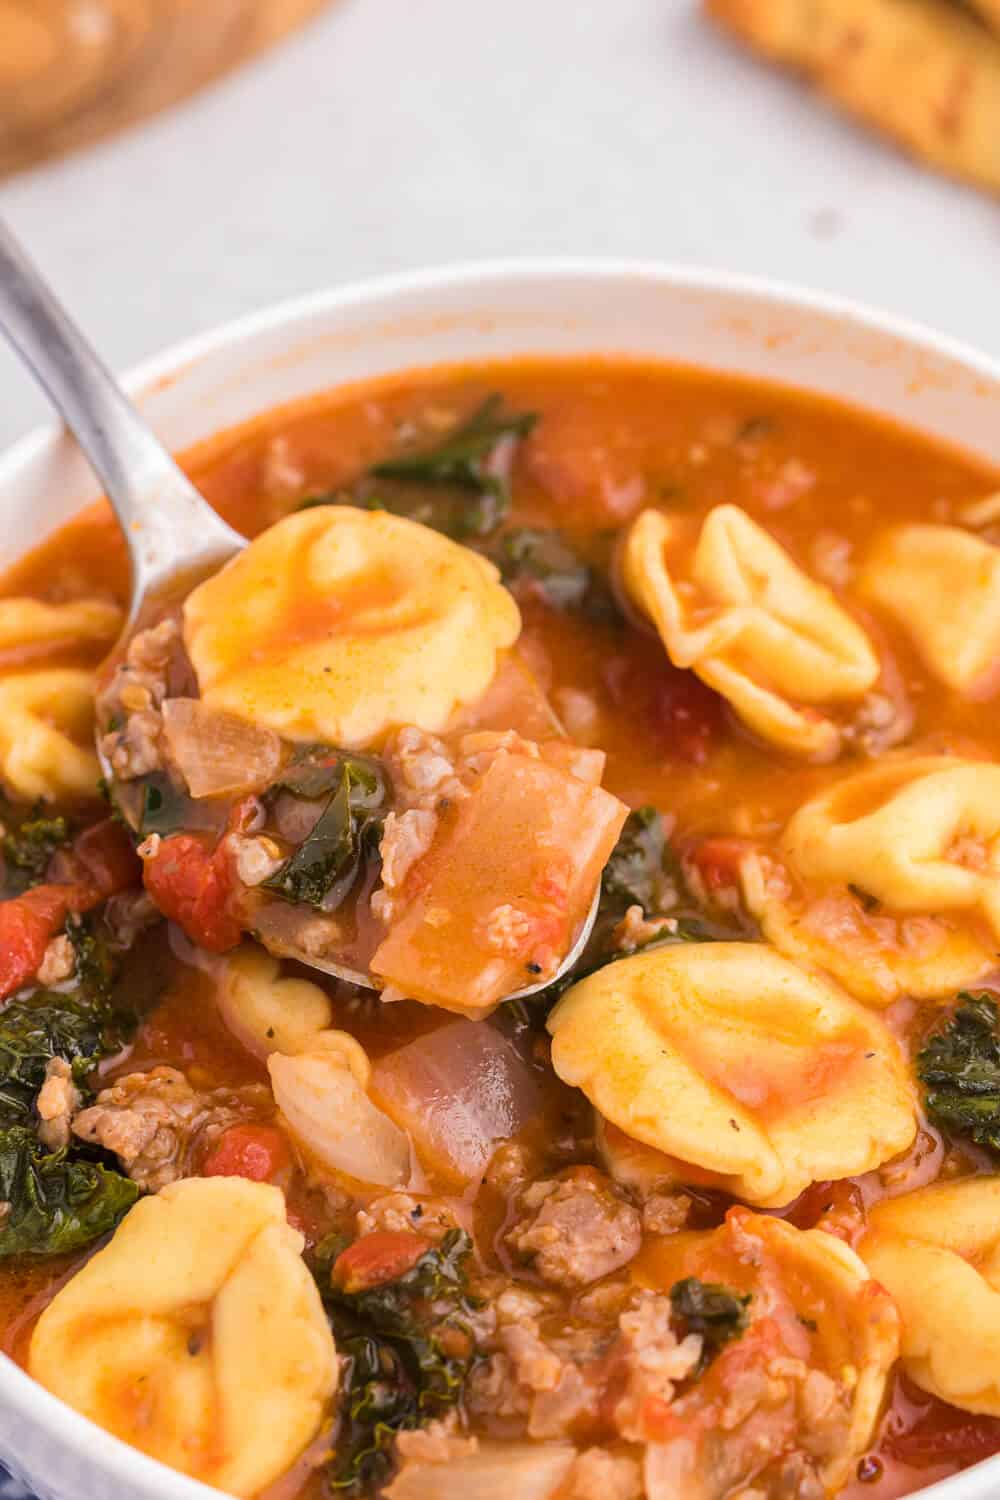 Tortellini soup on a spoon in a white bowl.